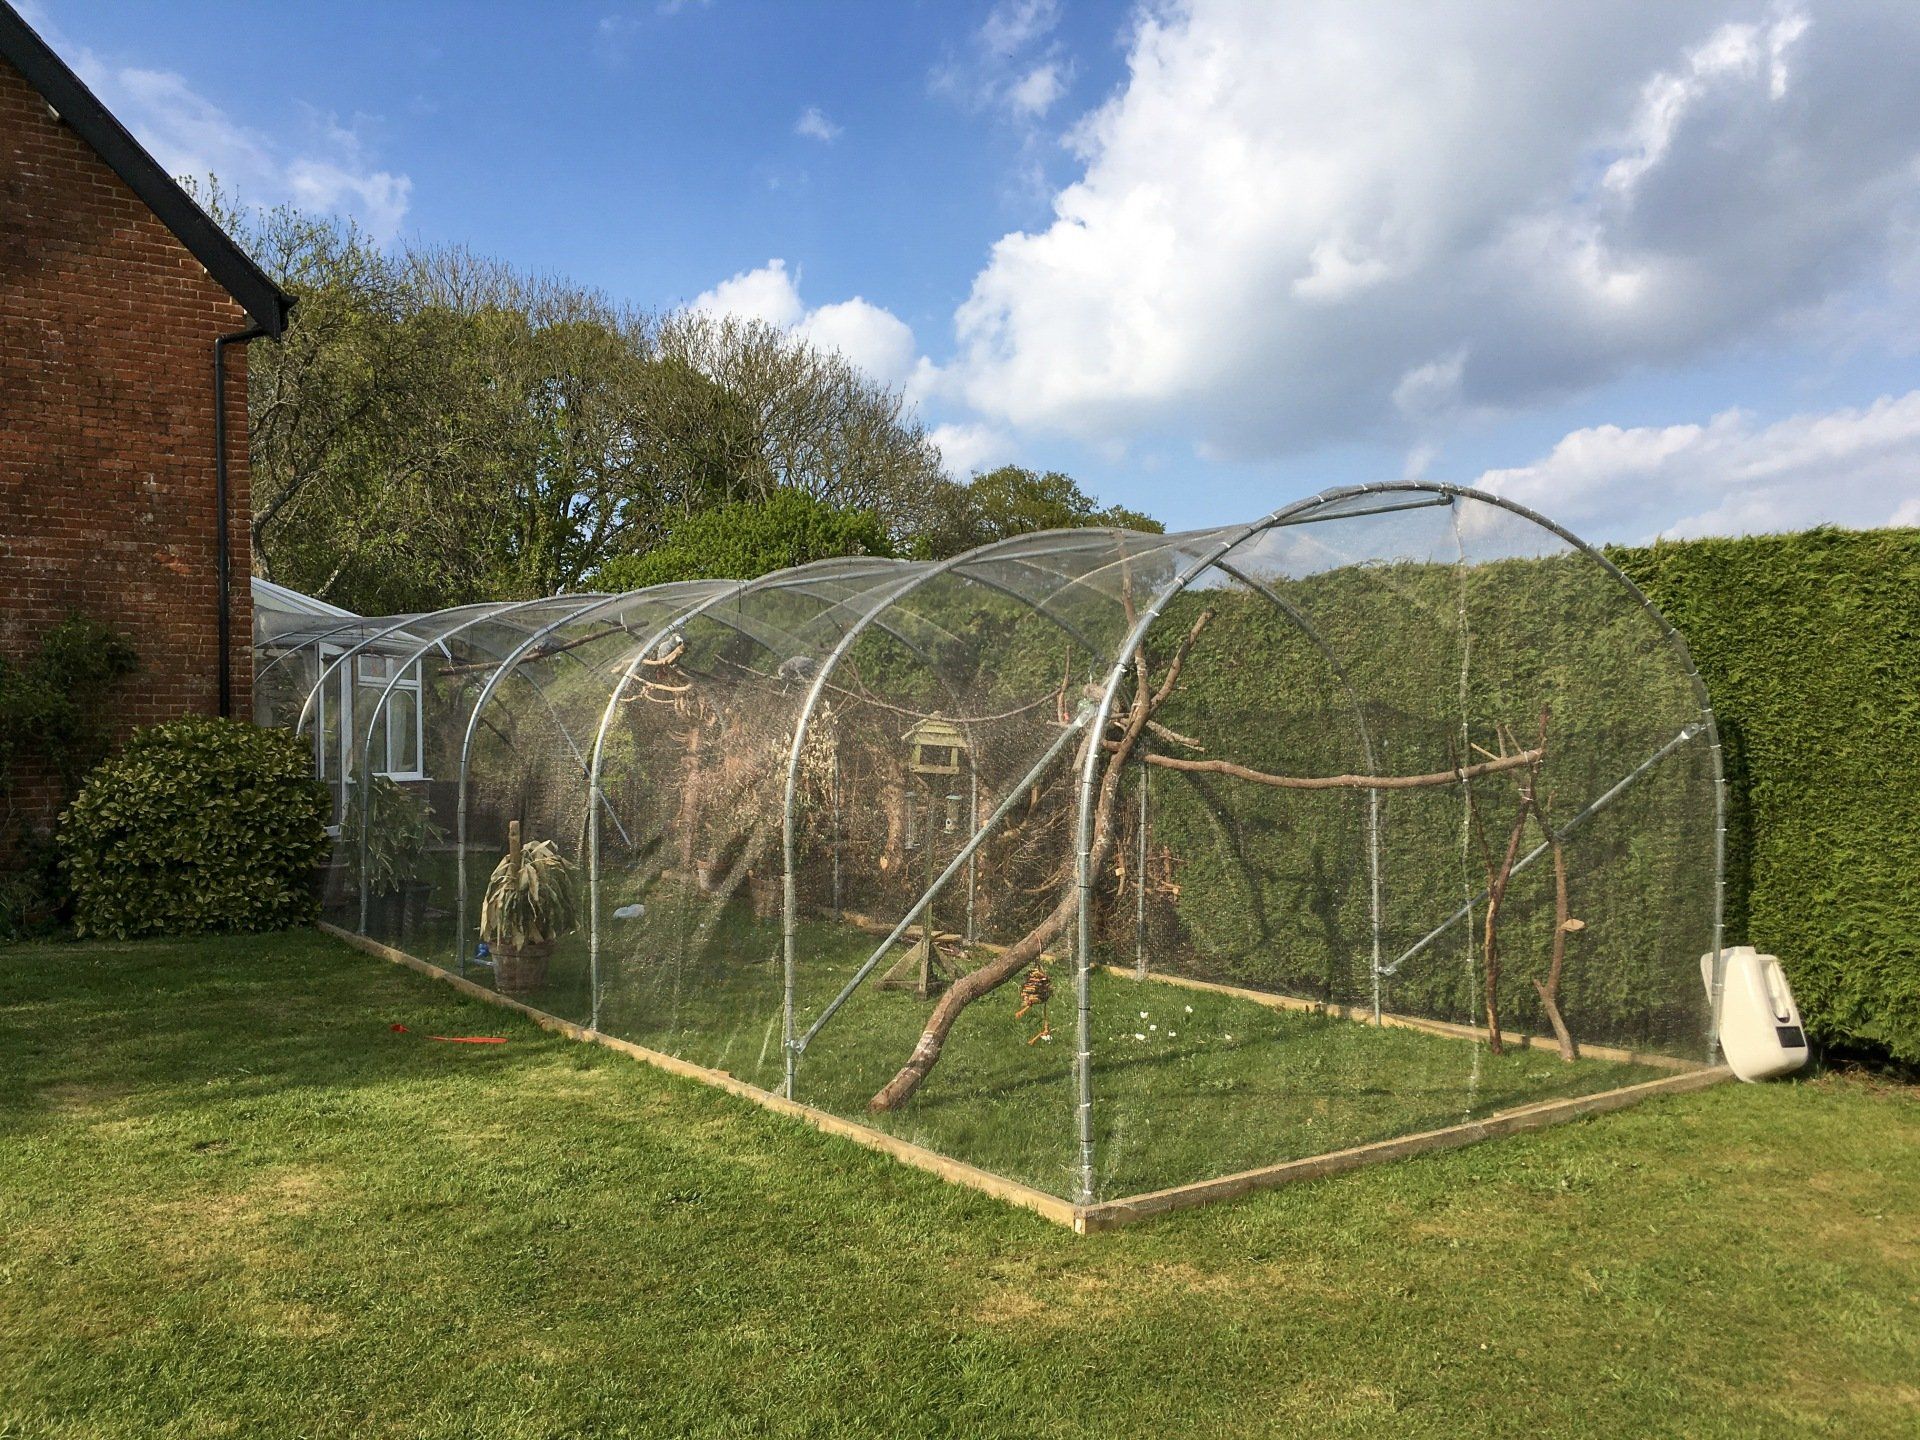 Polytunnel aviary structure in back garden